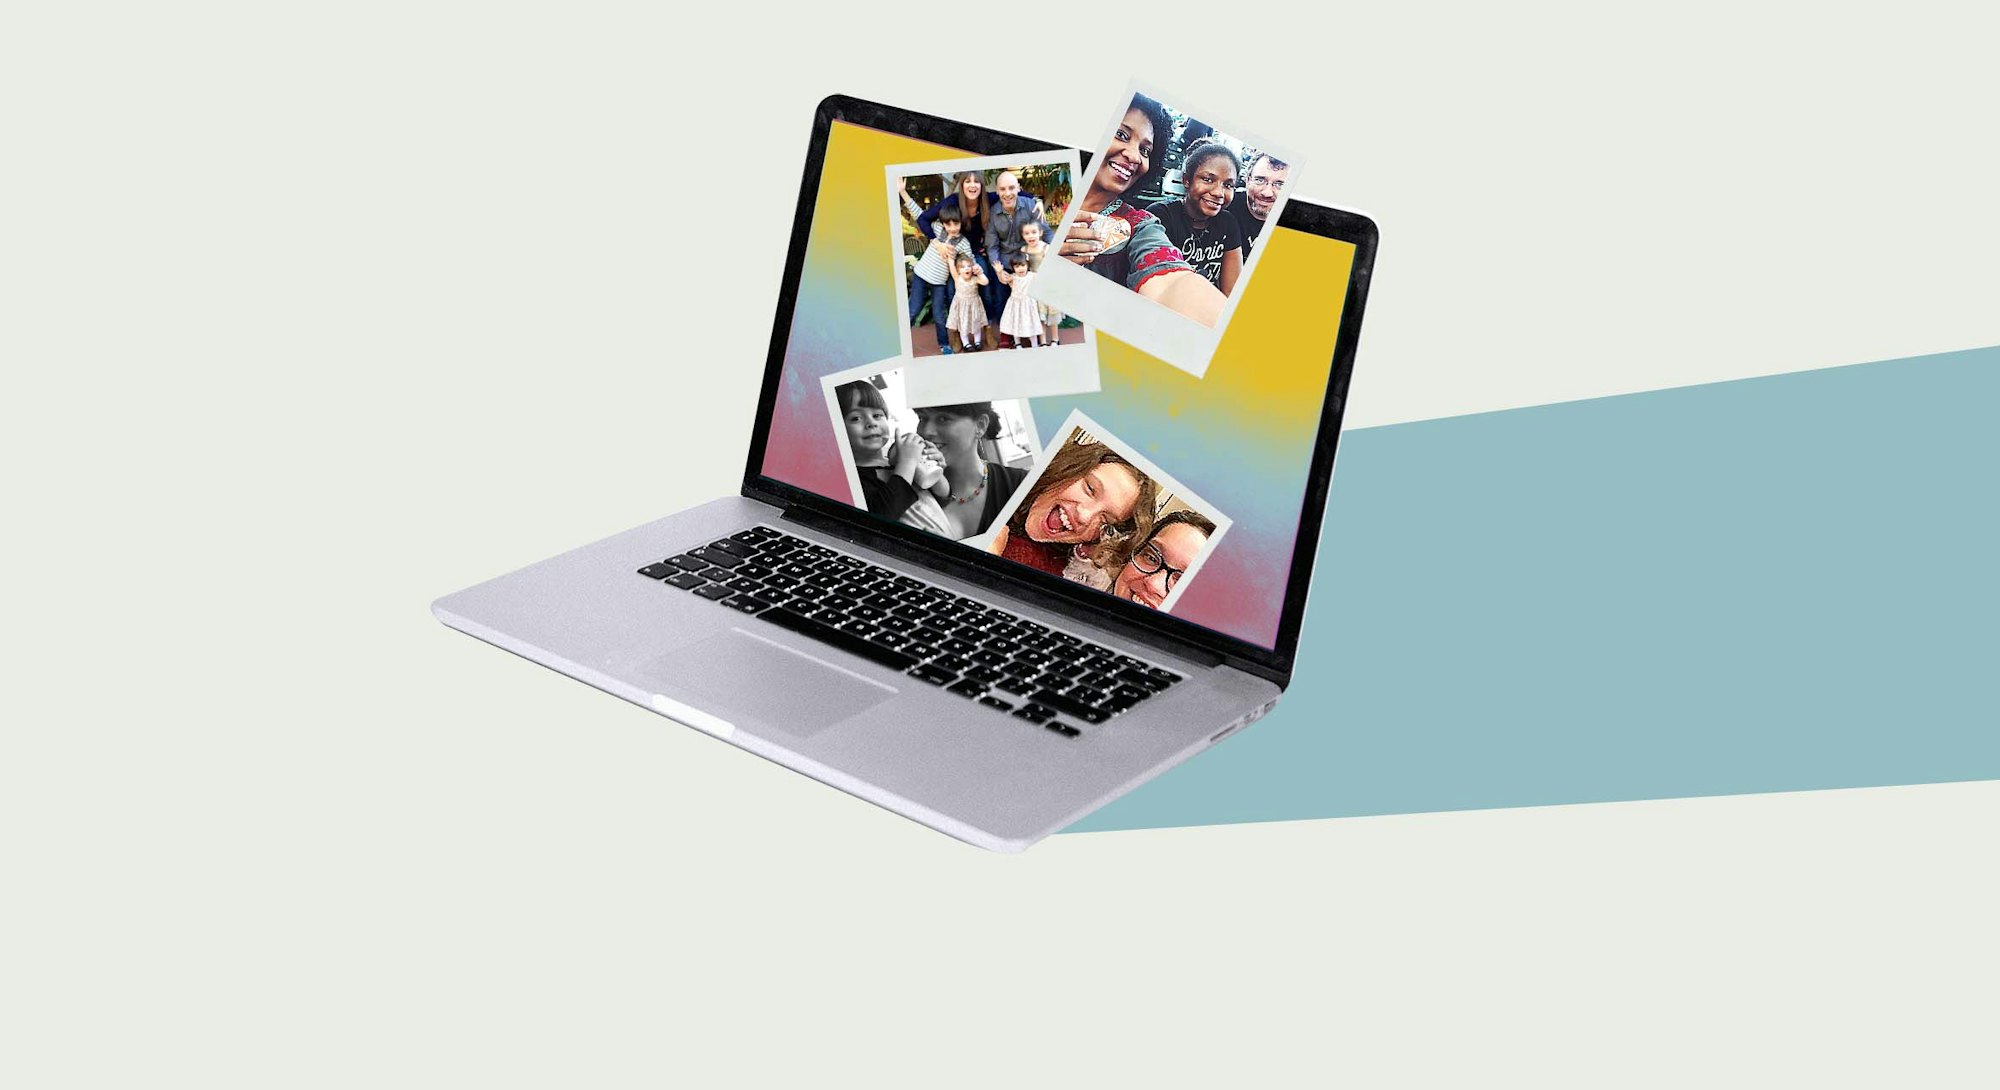 A laptop with celluloid pictures of families posted on its screen